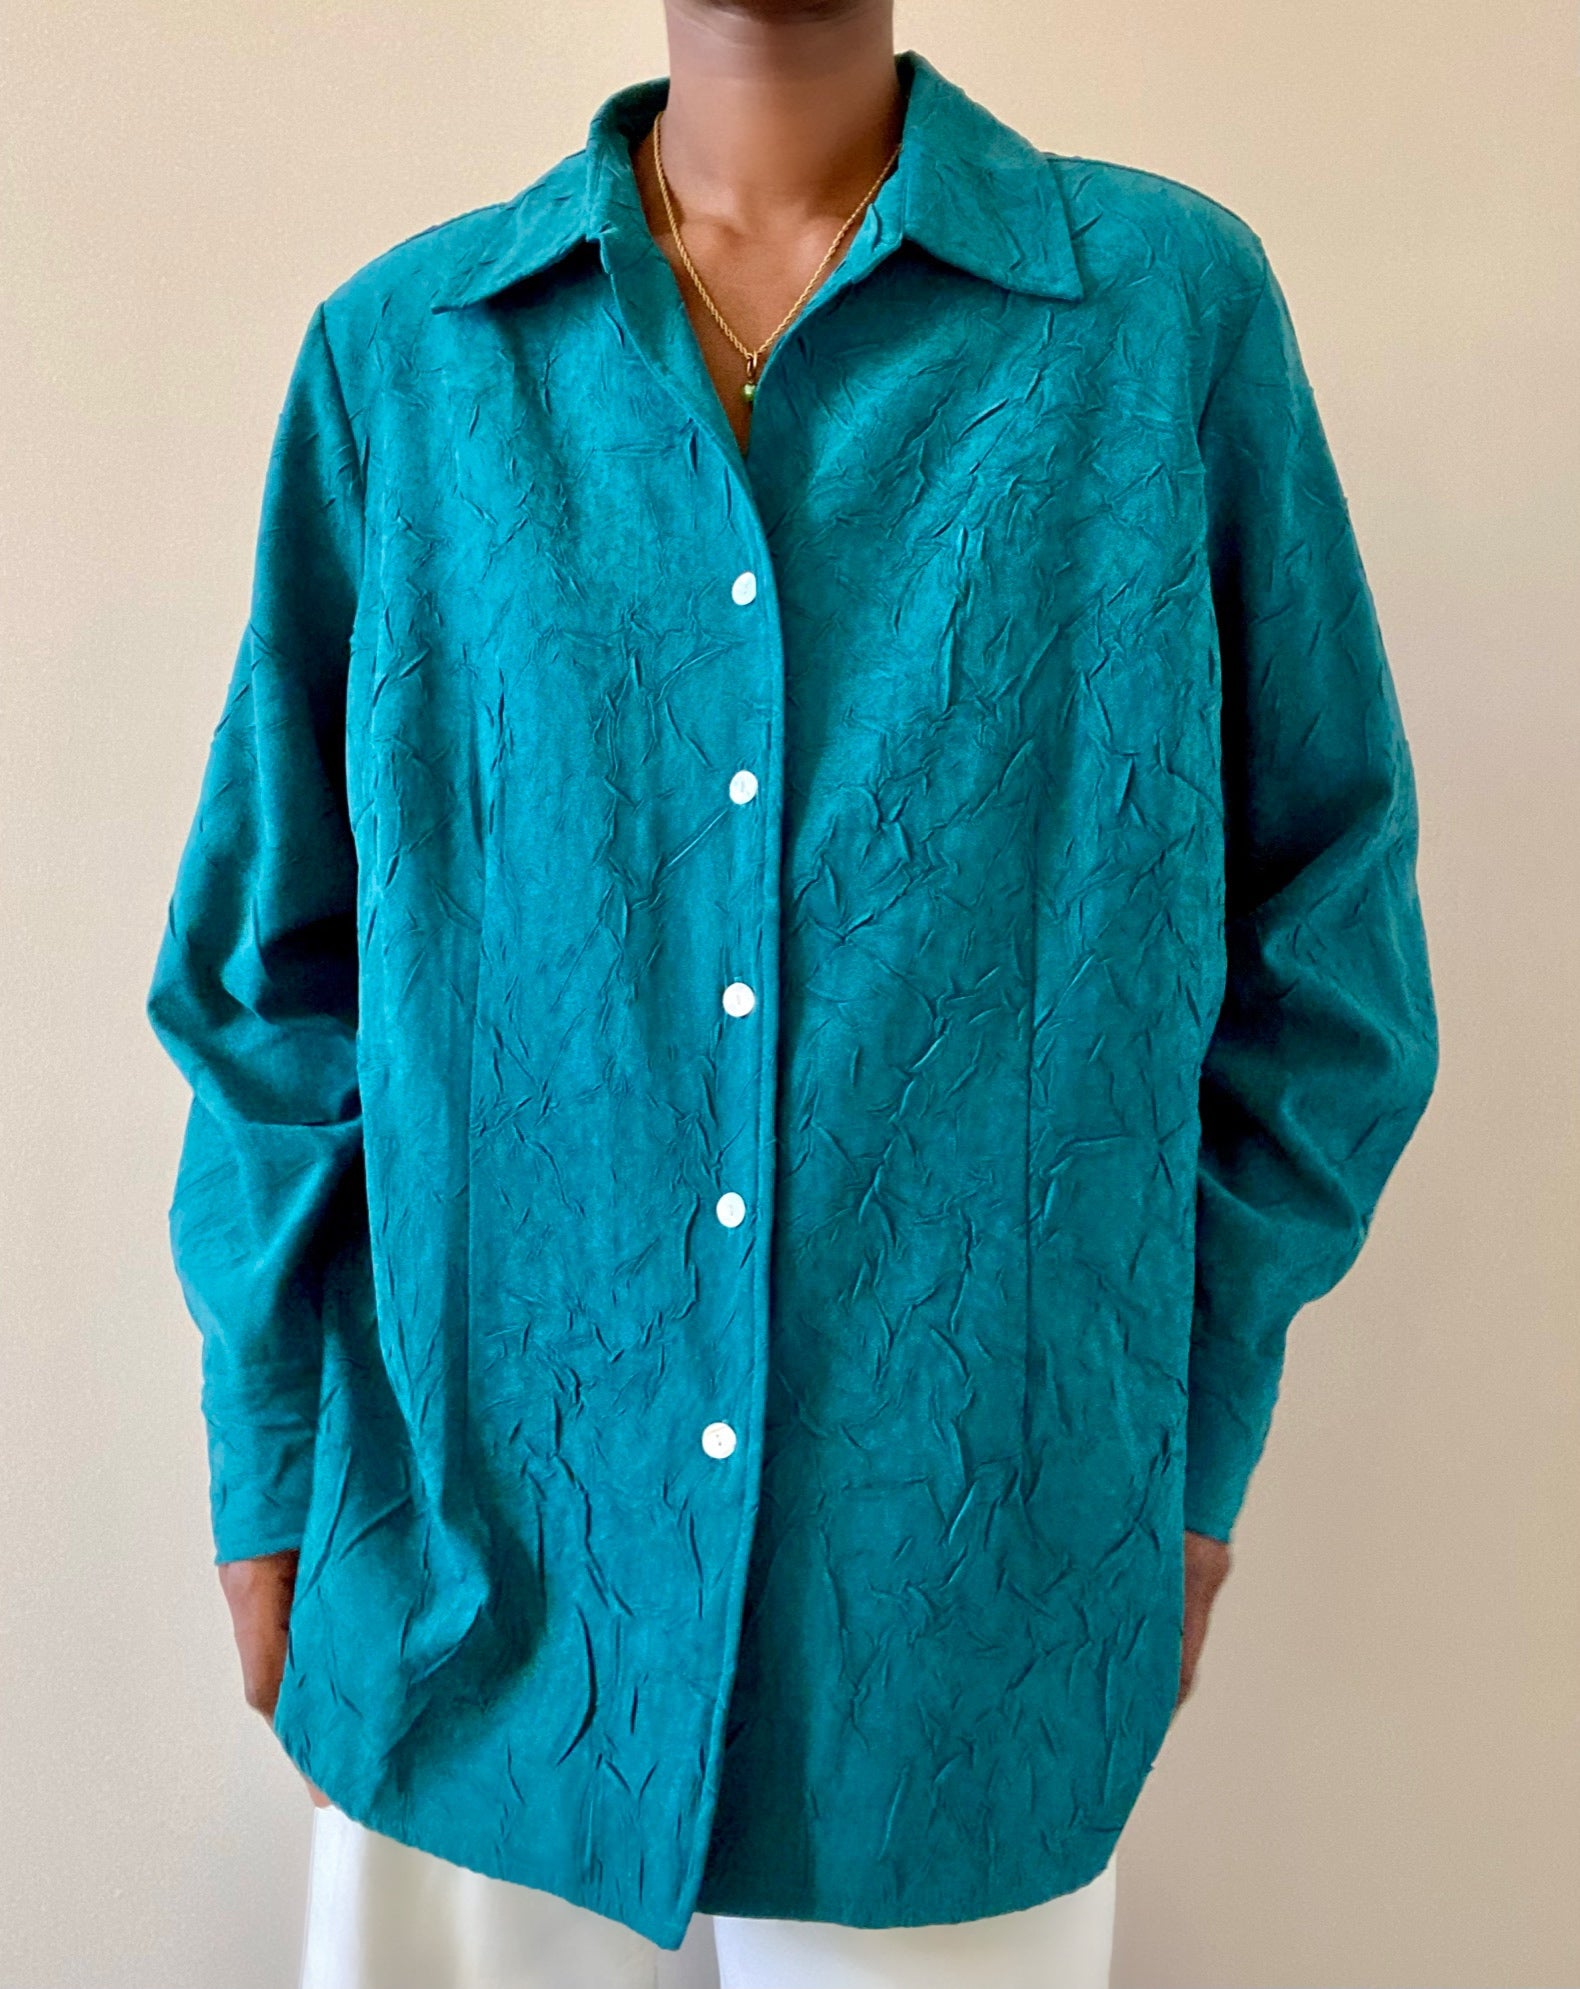 Teal Abstract Textured Button Down Blouse